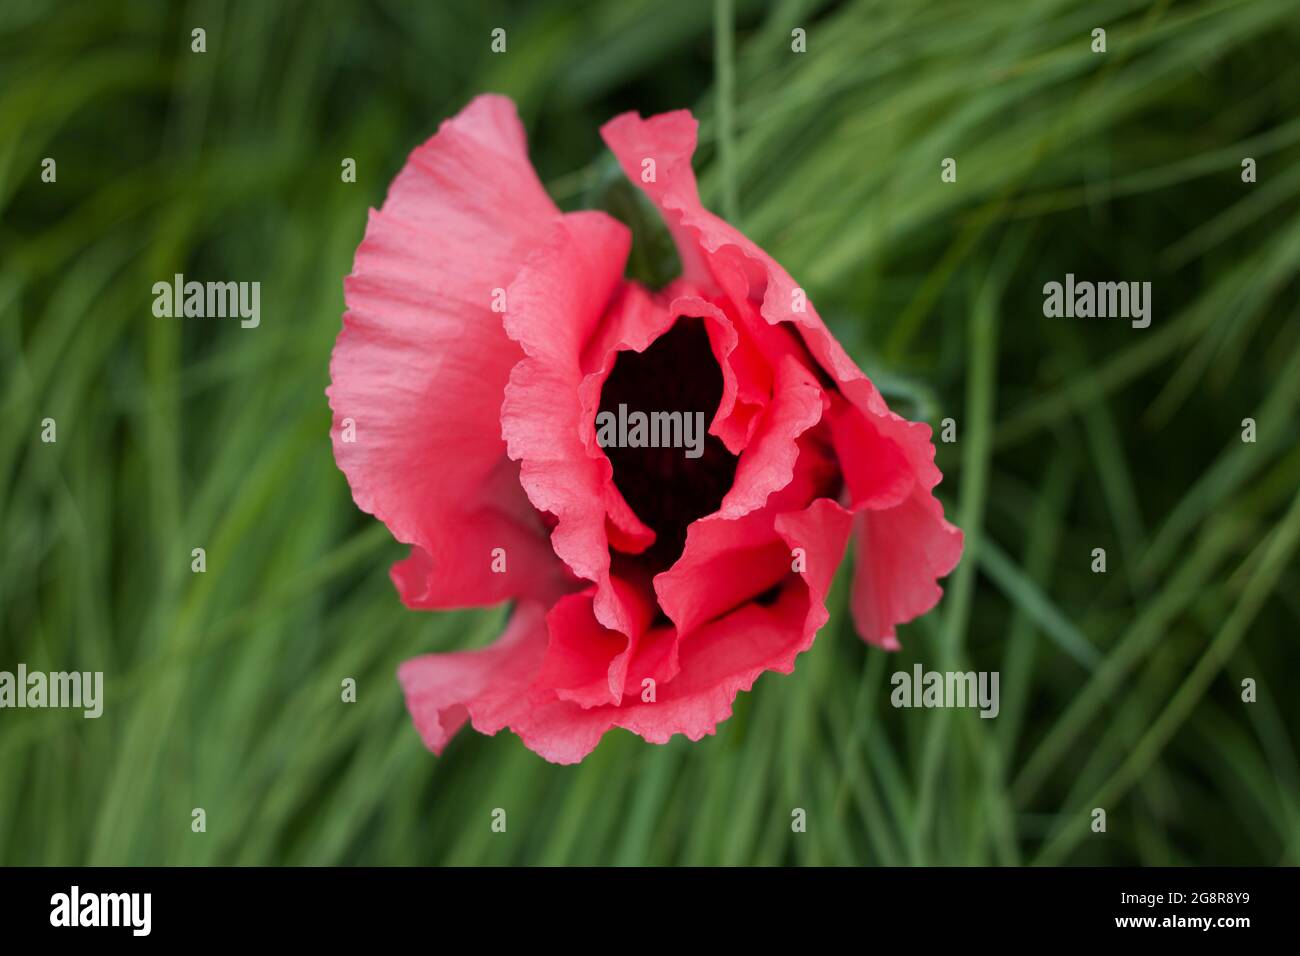 Beautiful pink poppy taken from above surrounded by blurred green foliage Stock Photo